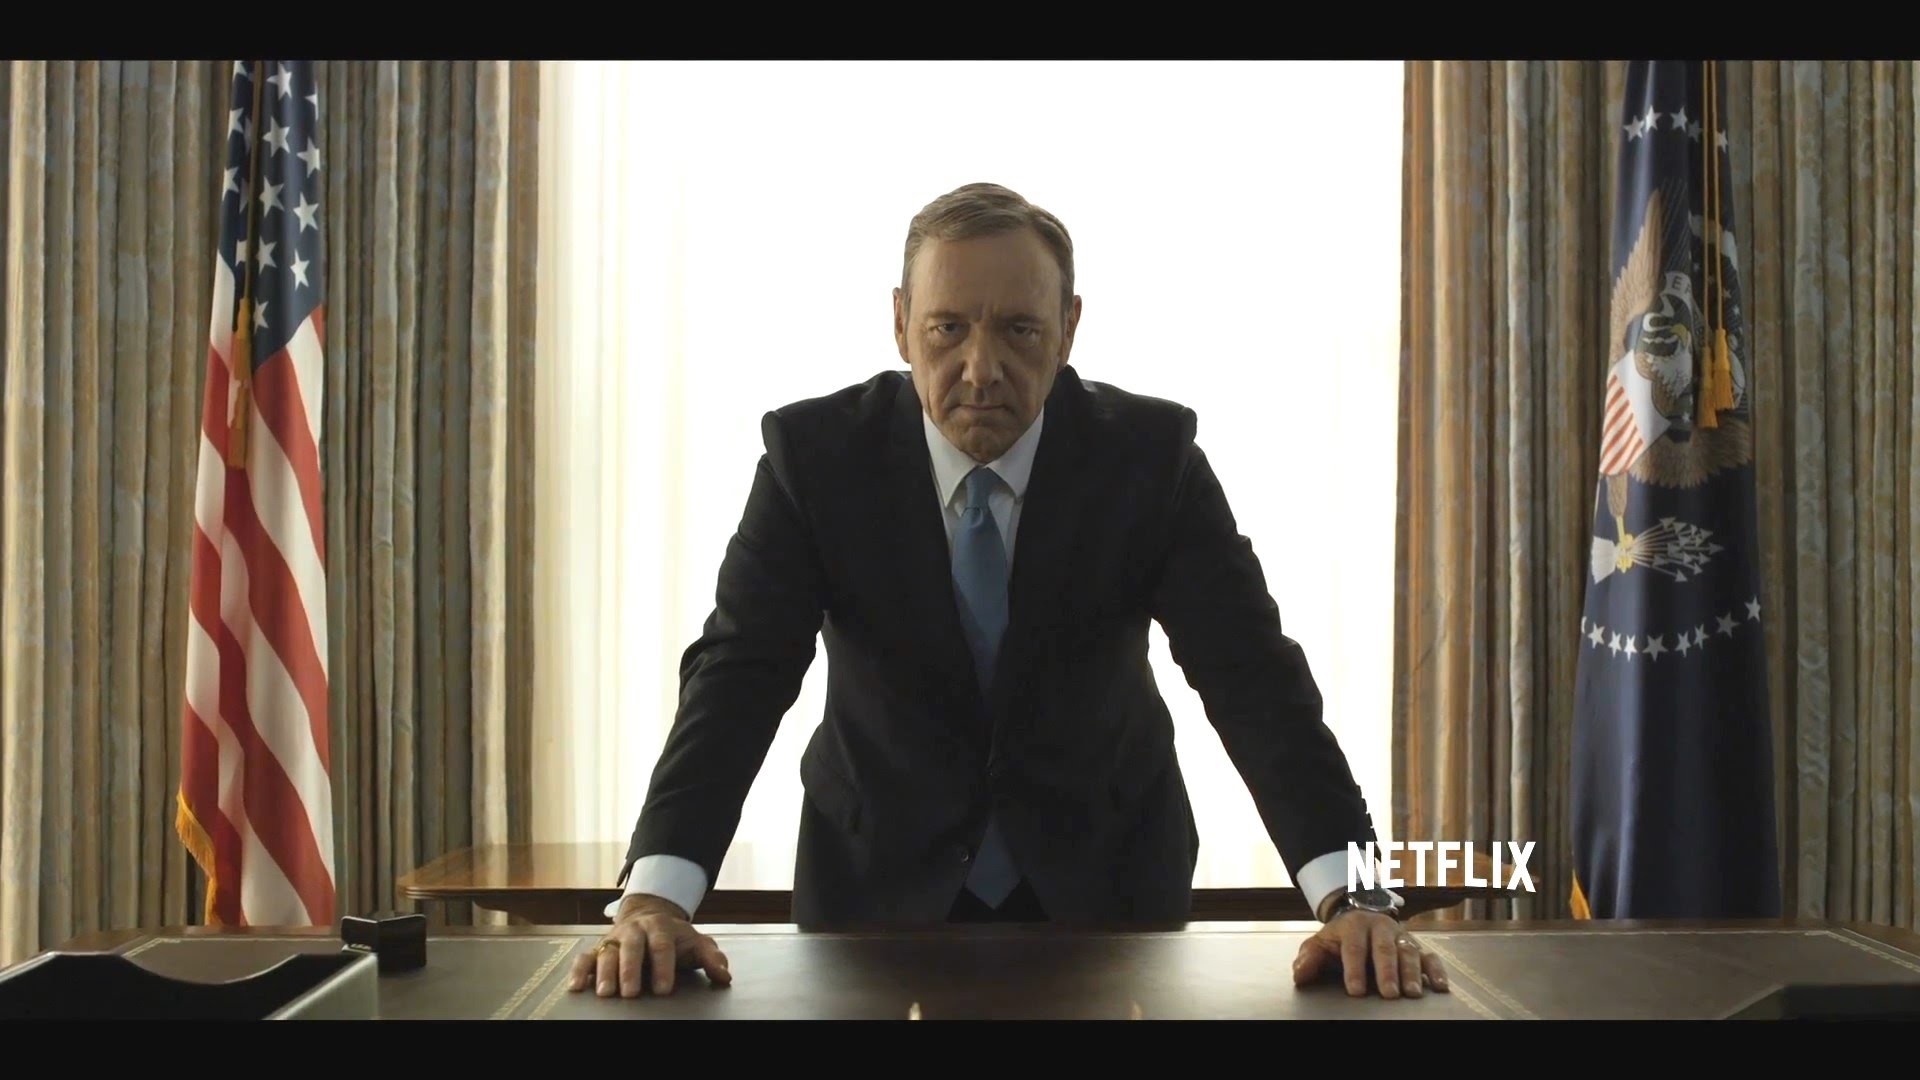 1920x1080 House of Cards Season 3 Tv Show Trailer (HD) (English & French Subtitles)